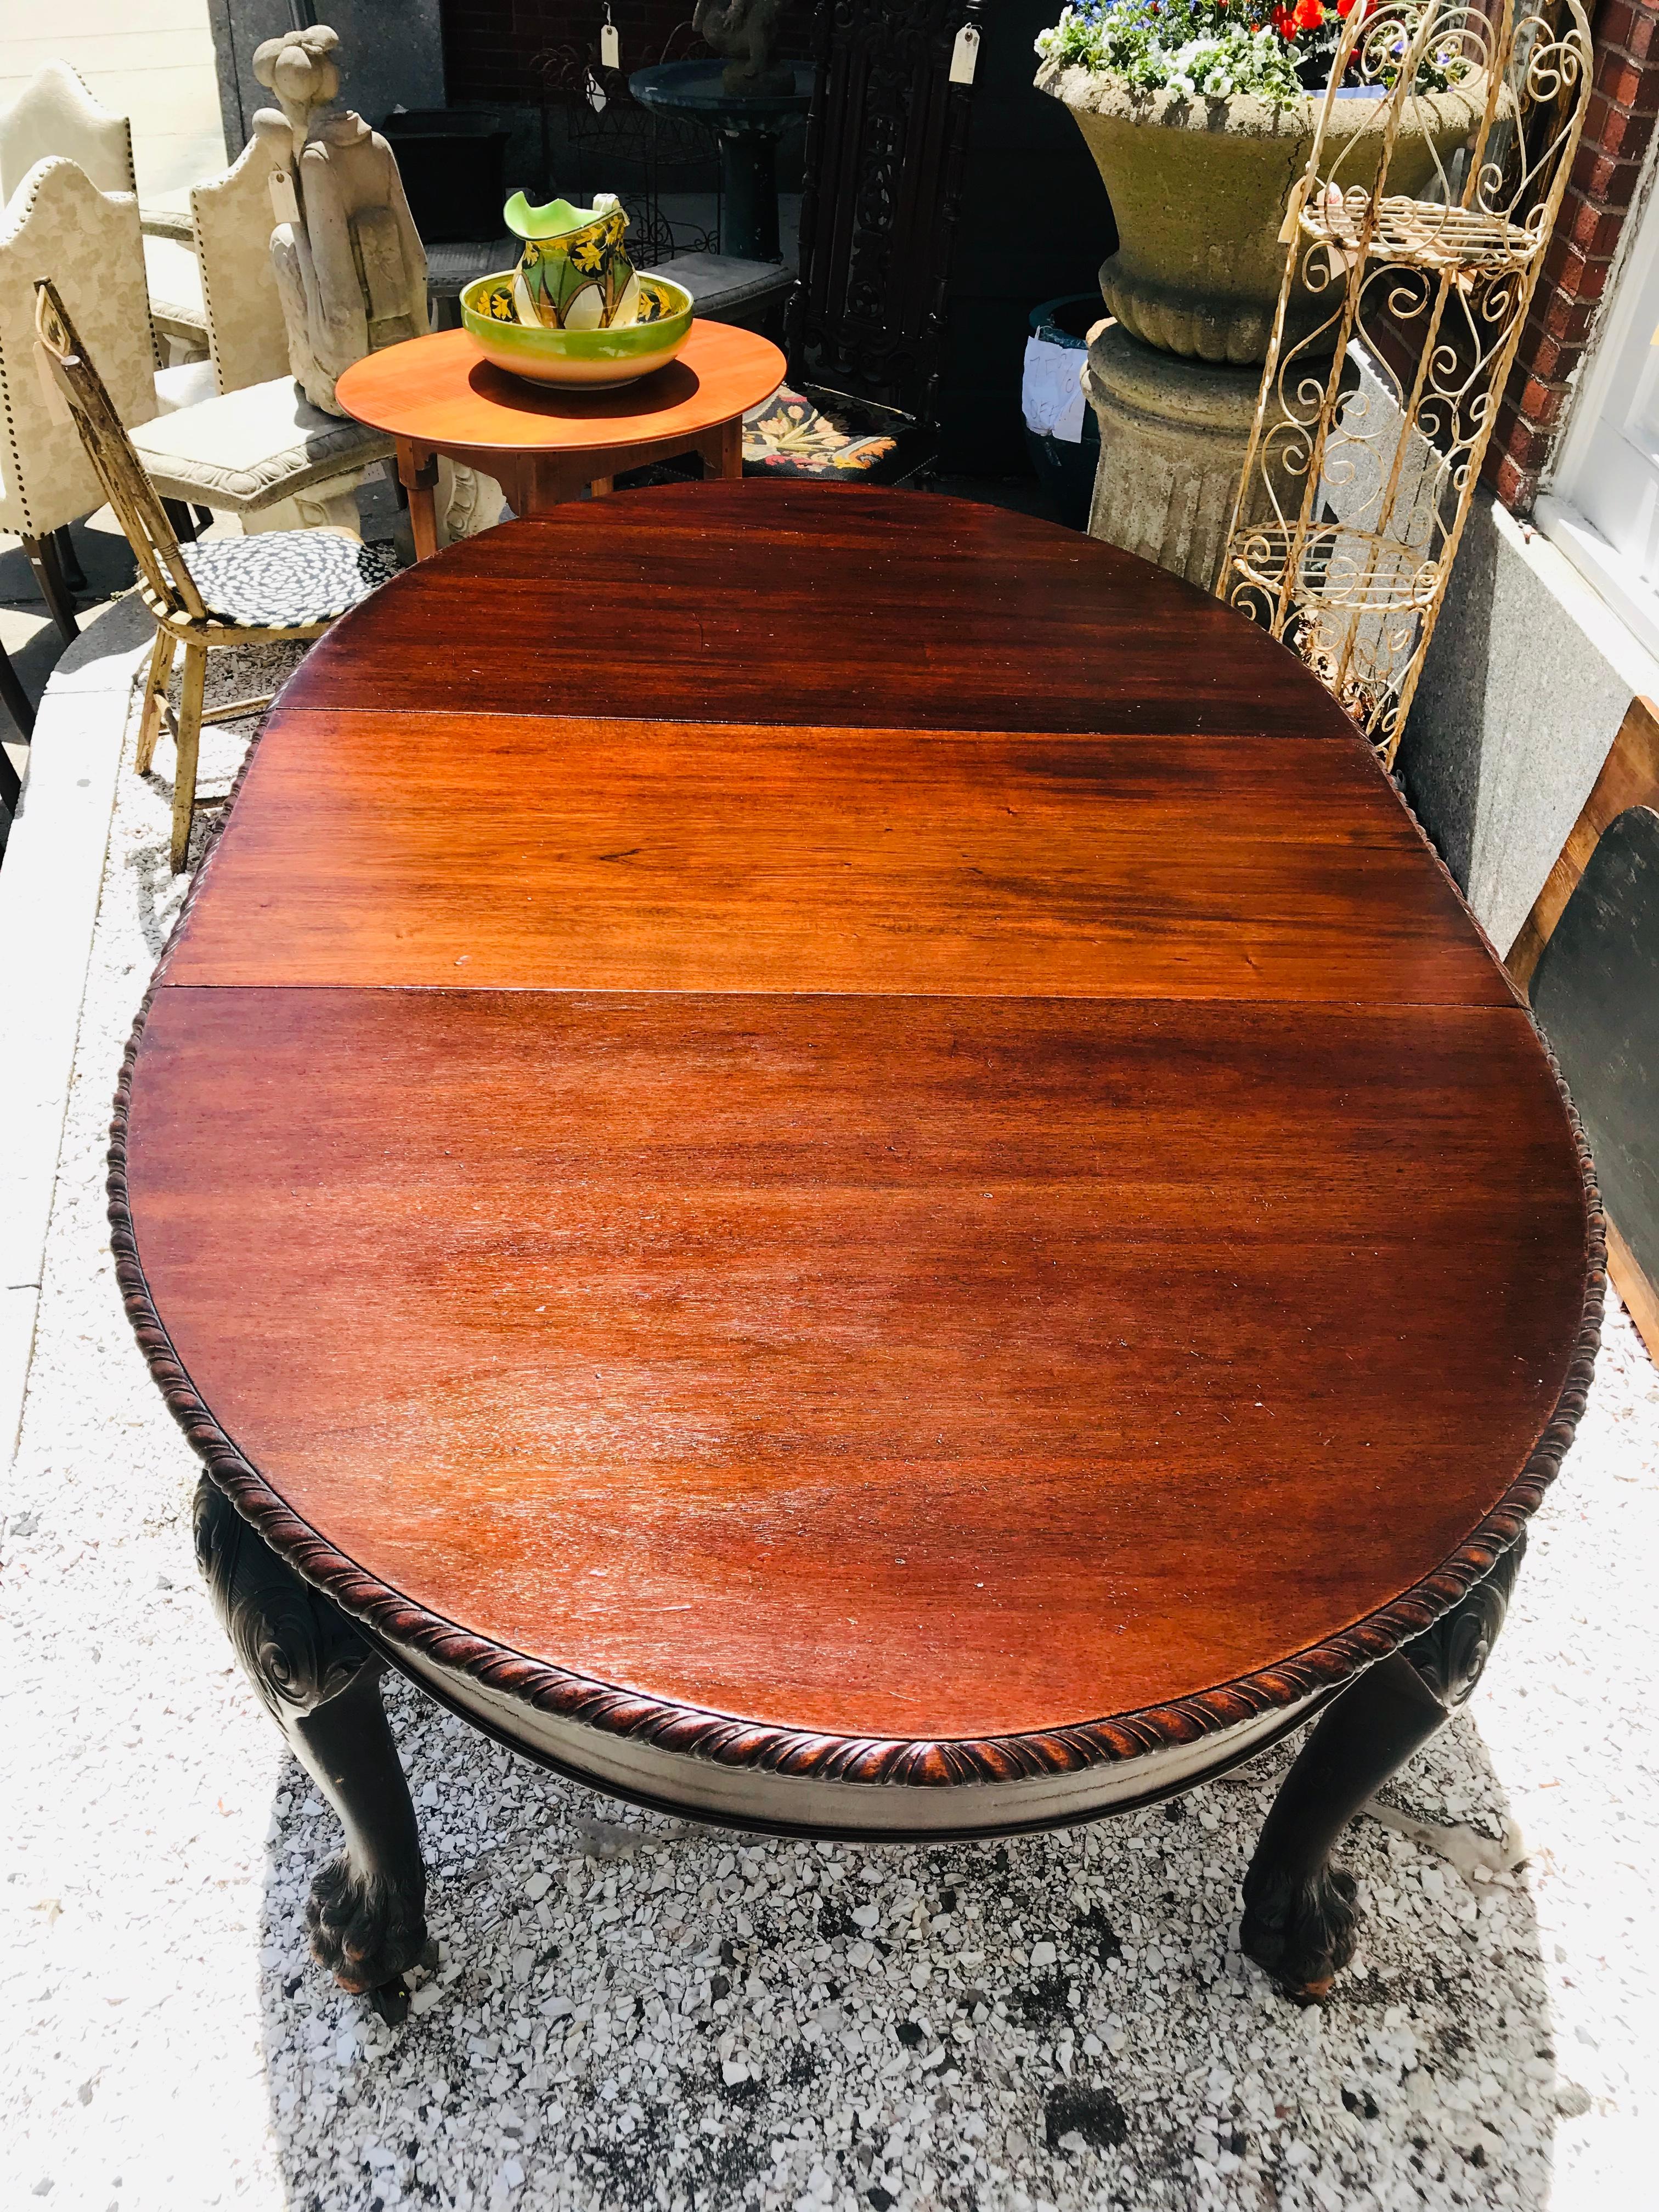 Have been in this business for decades and have never seen one before. Truly 18th century solid mahogany American made dining room table in remarkable condition. Made from choice heavy 1st growth mahogany possible Cuban. The weight alone requires a